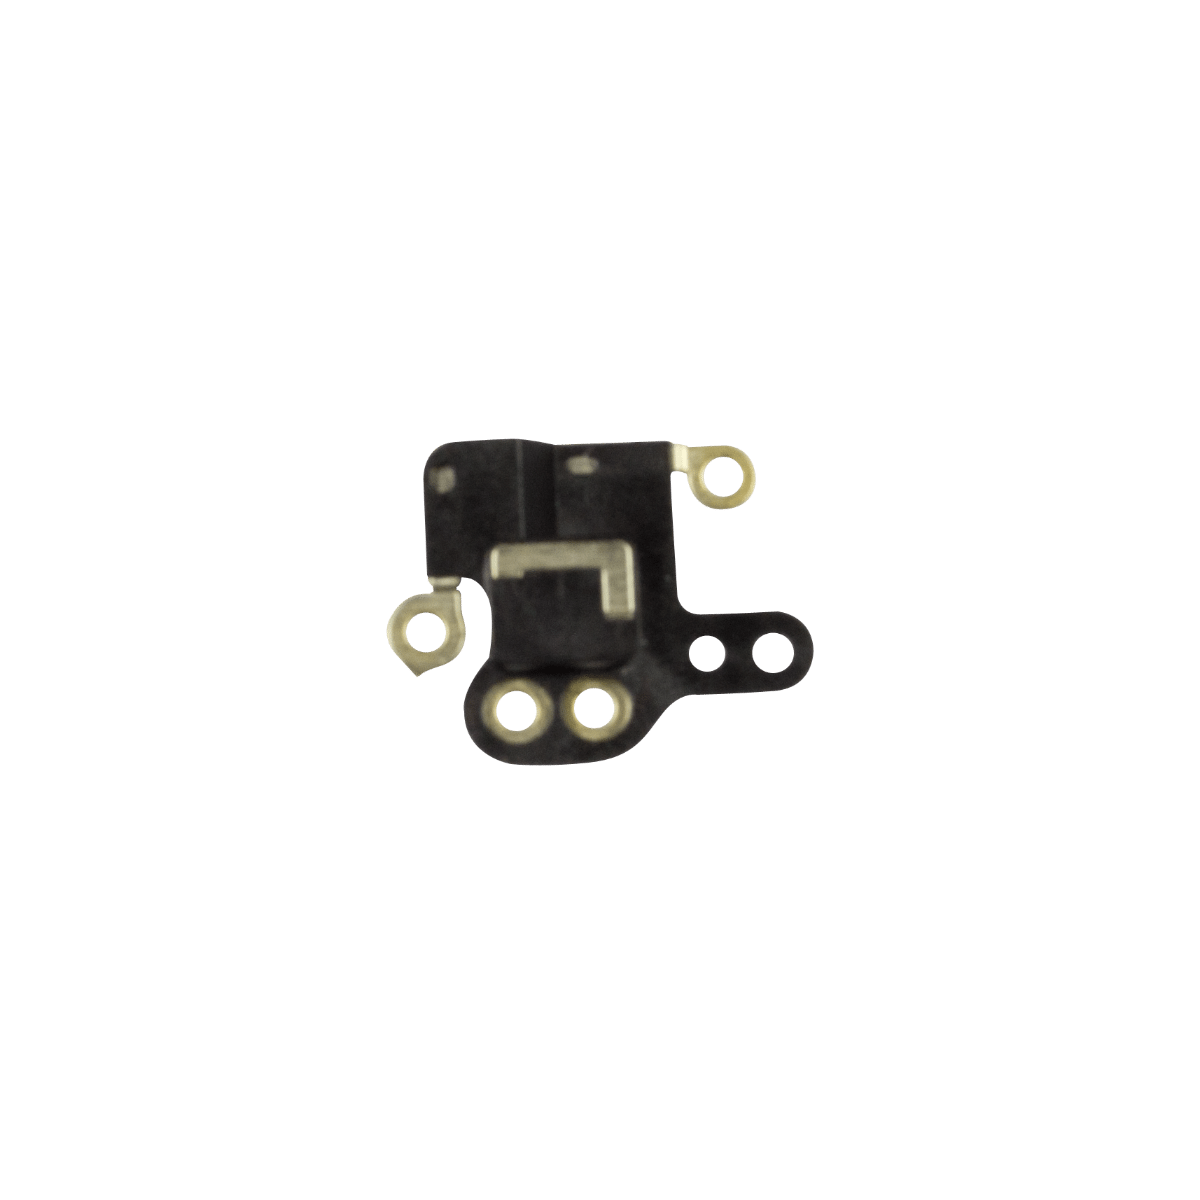 iPhone 6 WiFi Antenna Flex Cable Replacement